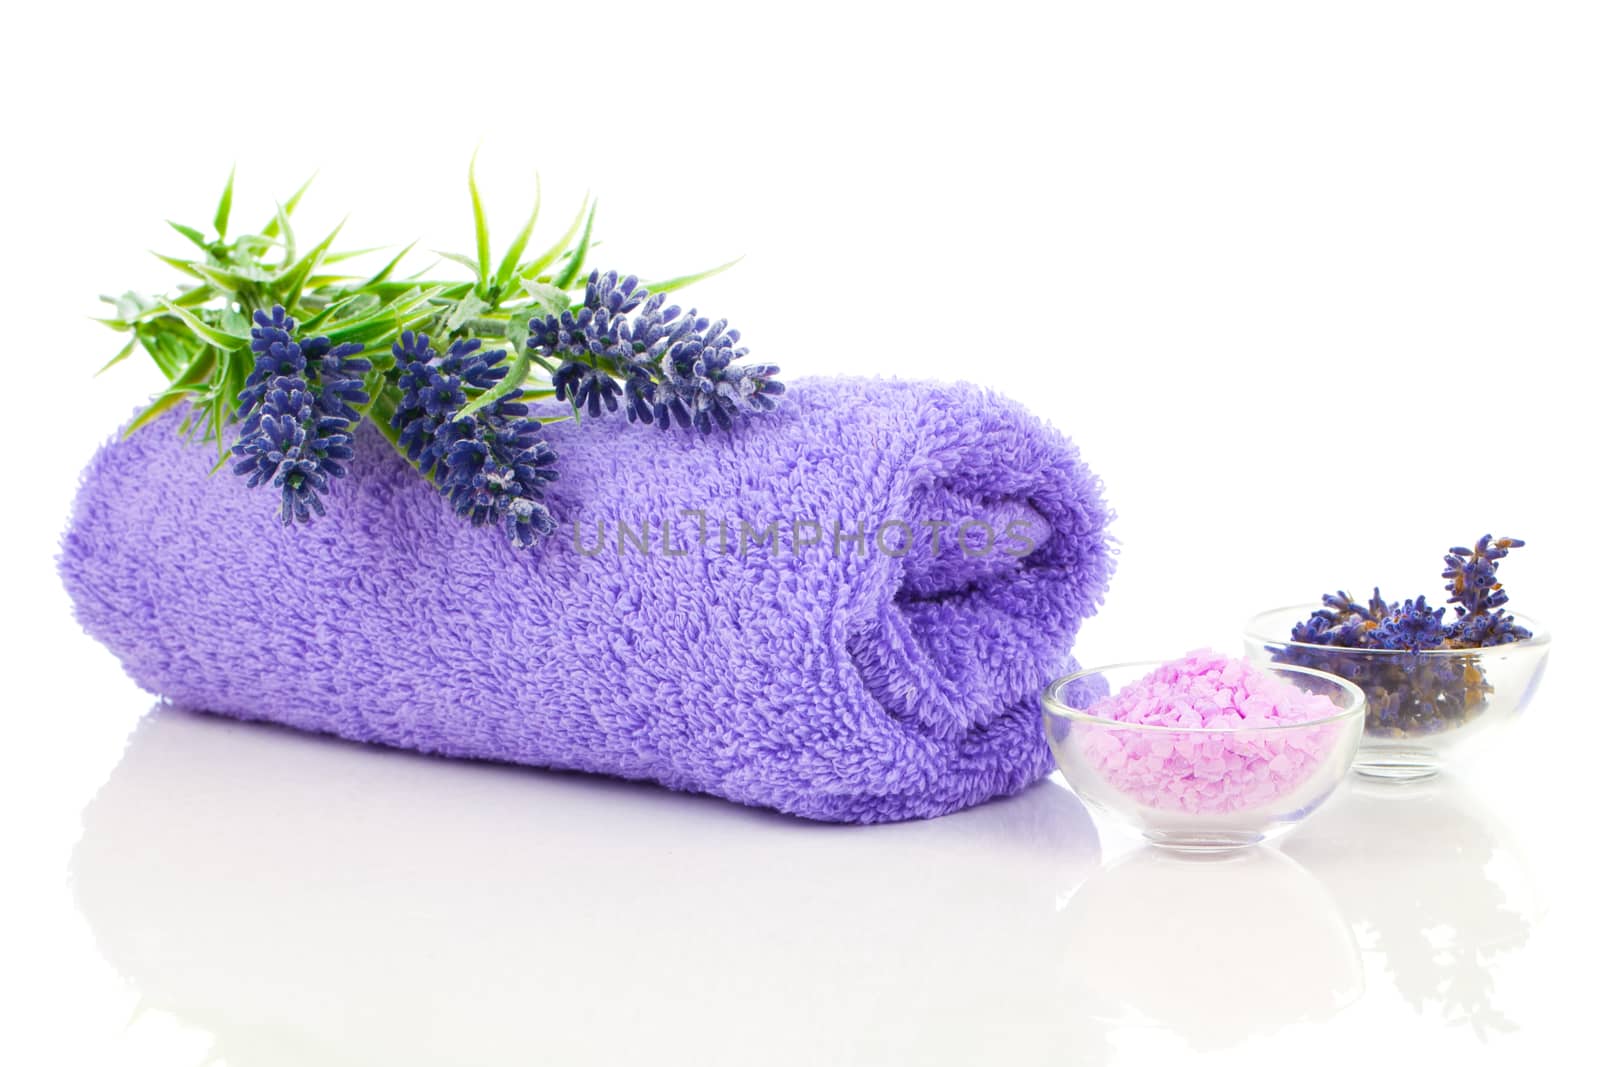 Colorful towel with lavender flower and aromatic bath salt. Isol by motorolka